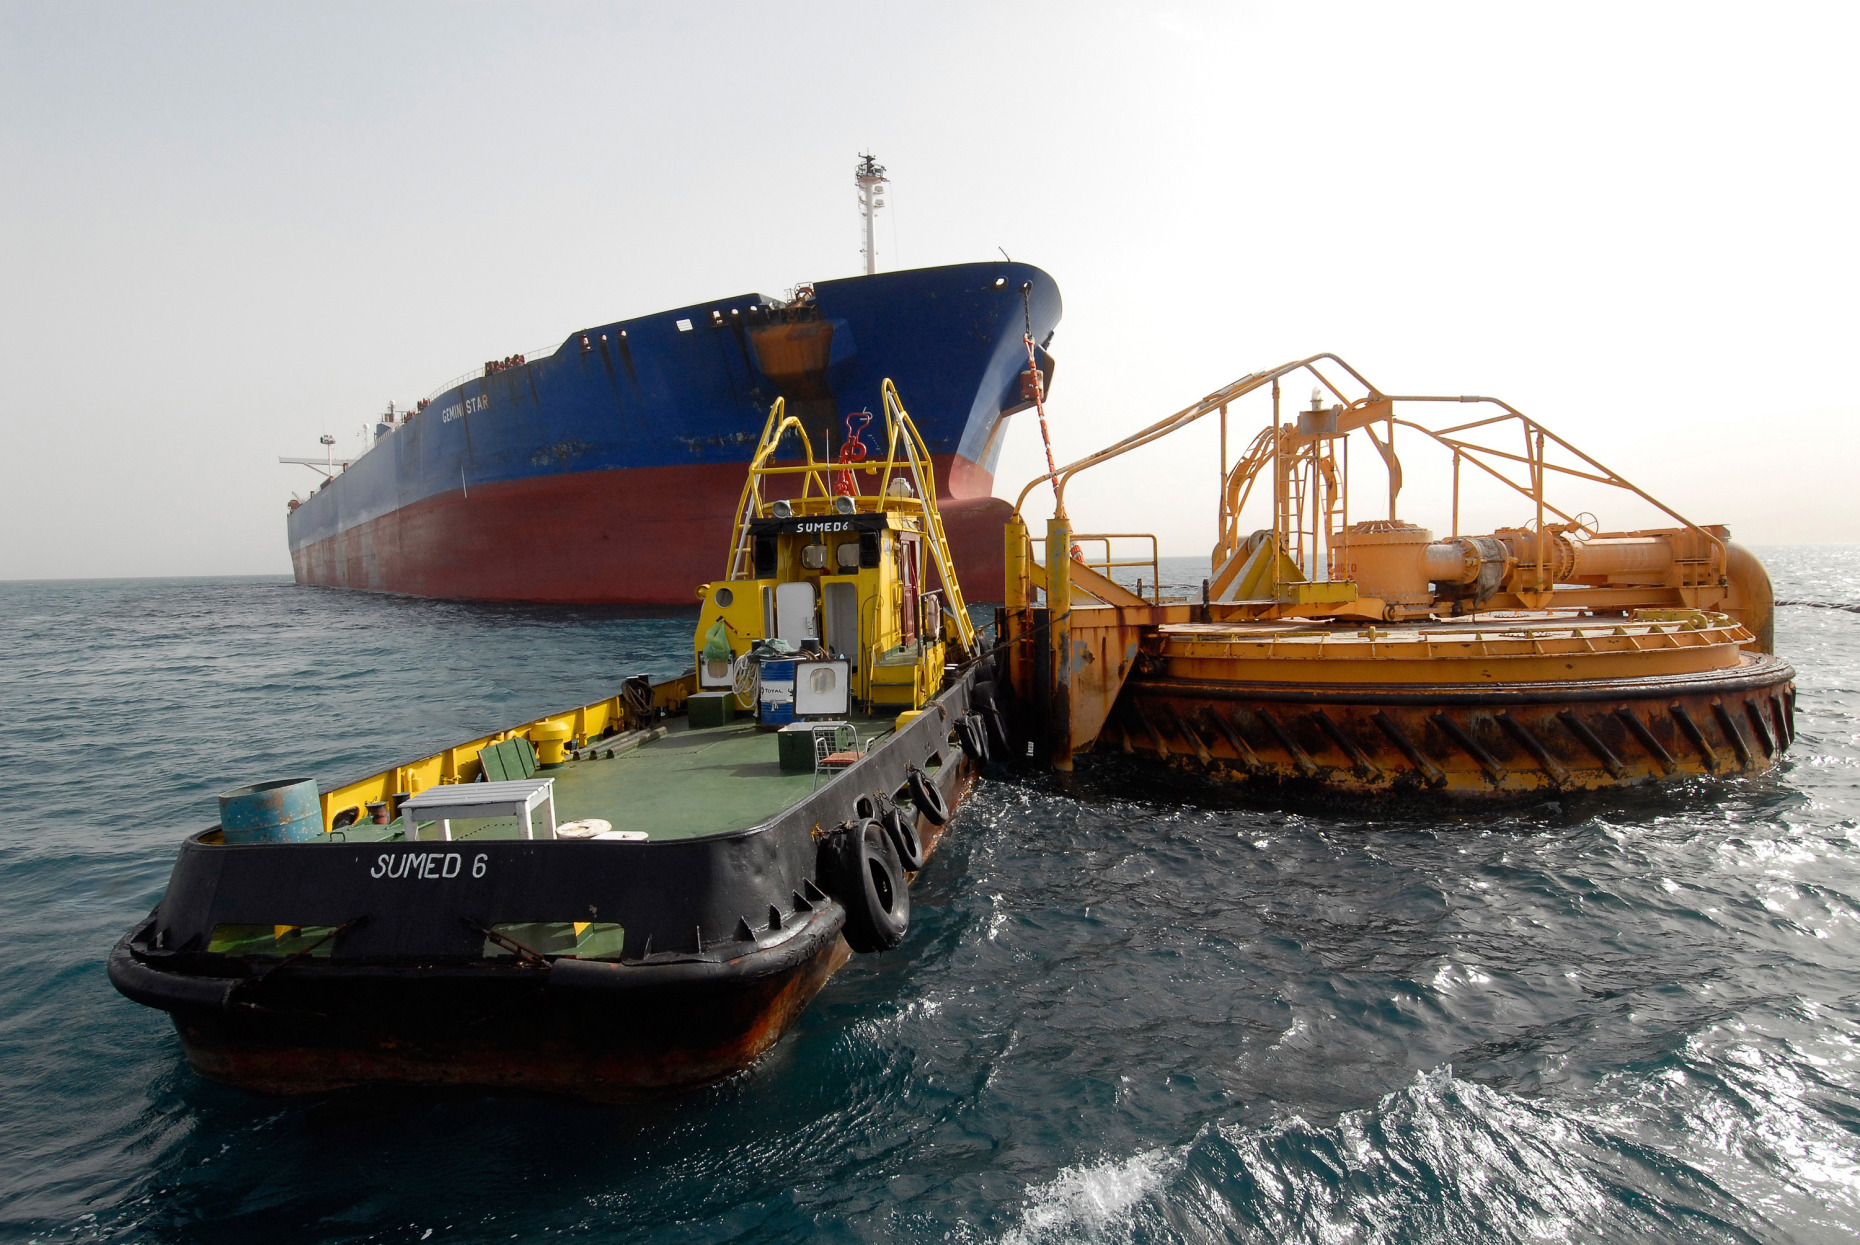 An oil tanker offloads into a single buoy mooring at the start of the Sumed pipeline in the Gulf of Suez,&nbsp;Egypt.